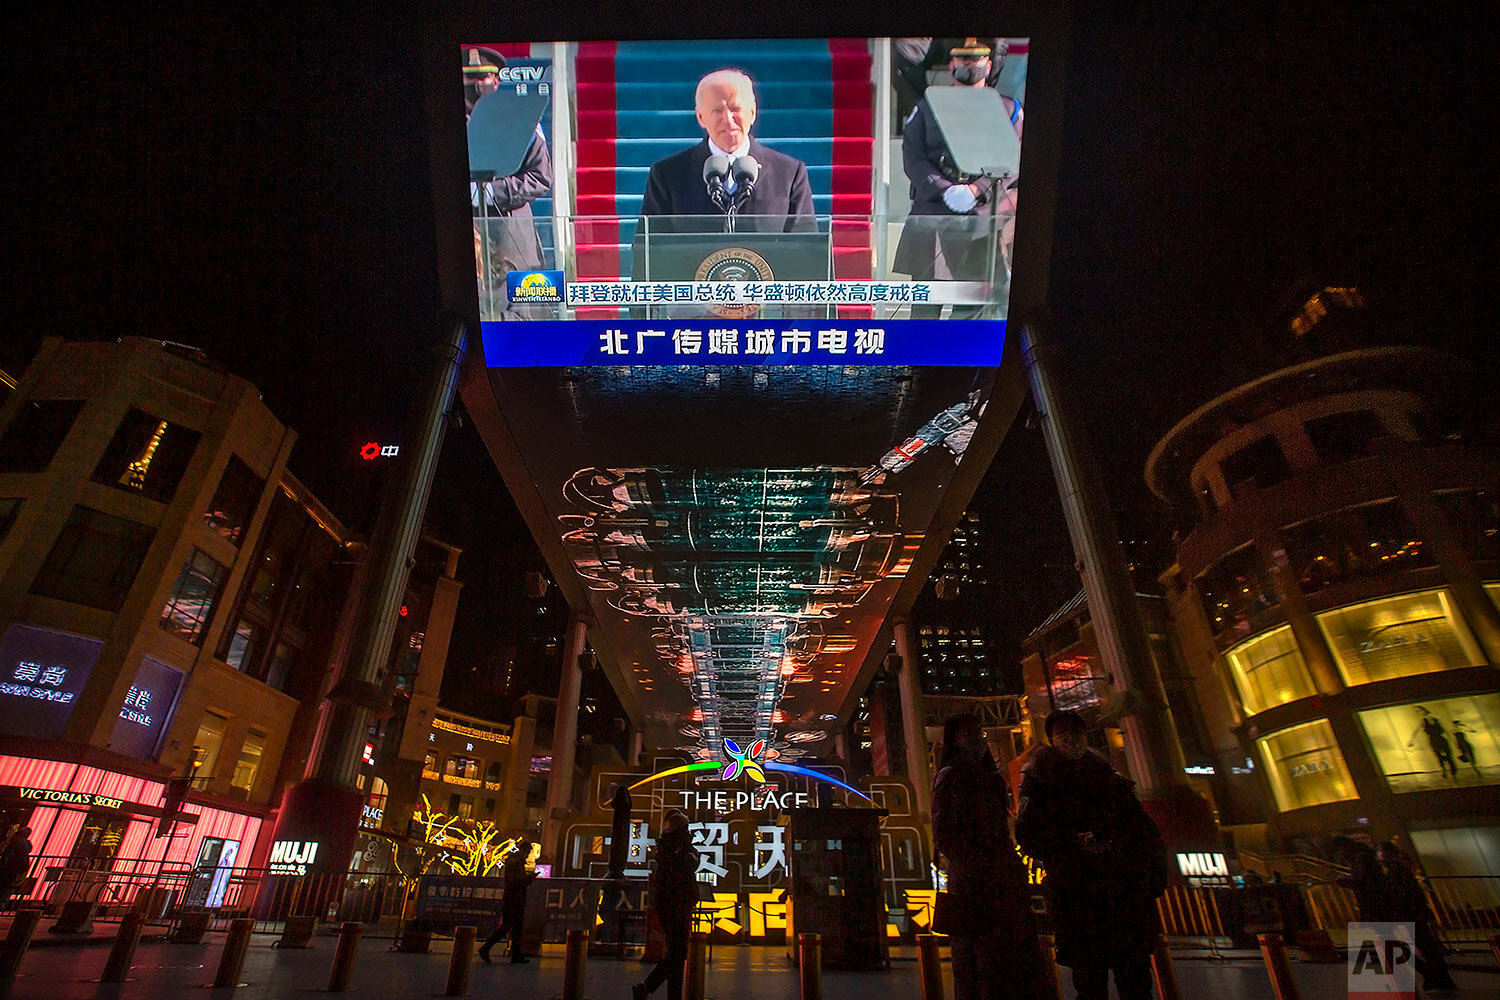  A large video screen shows a government news report about the inauguration of President Joe Biden at a shopping mall in Beijing, Thursday, Jan. 21, 2021. (AP Photo/Mark Schiefelbein) 